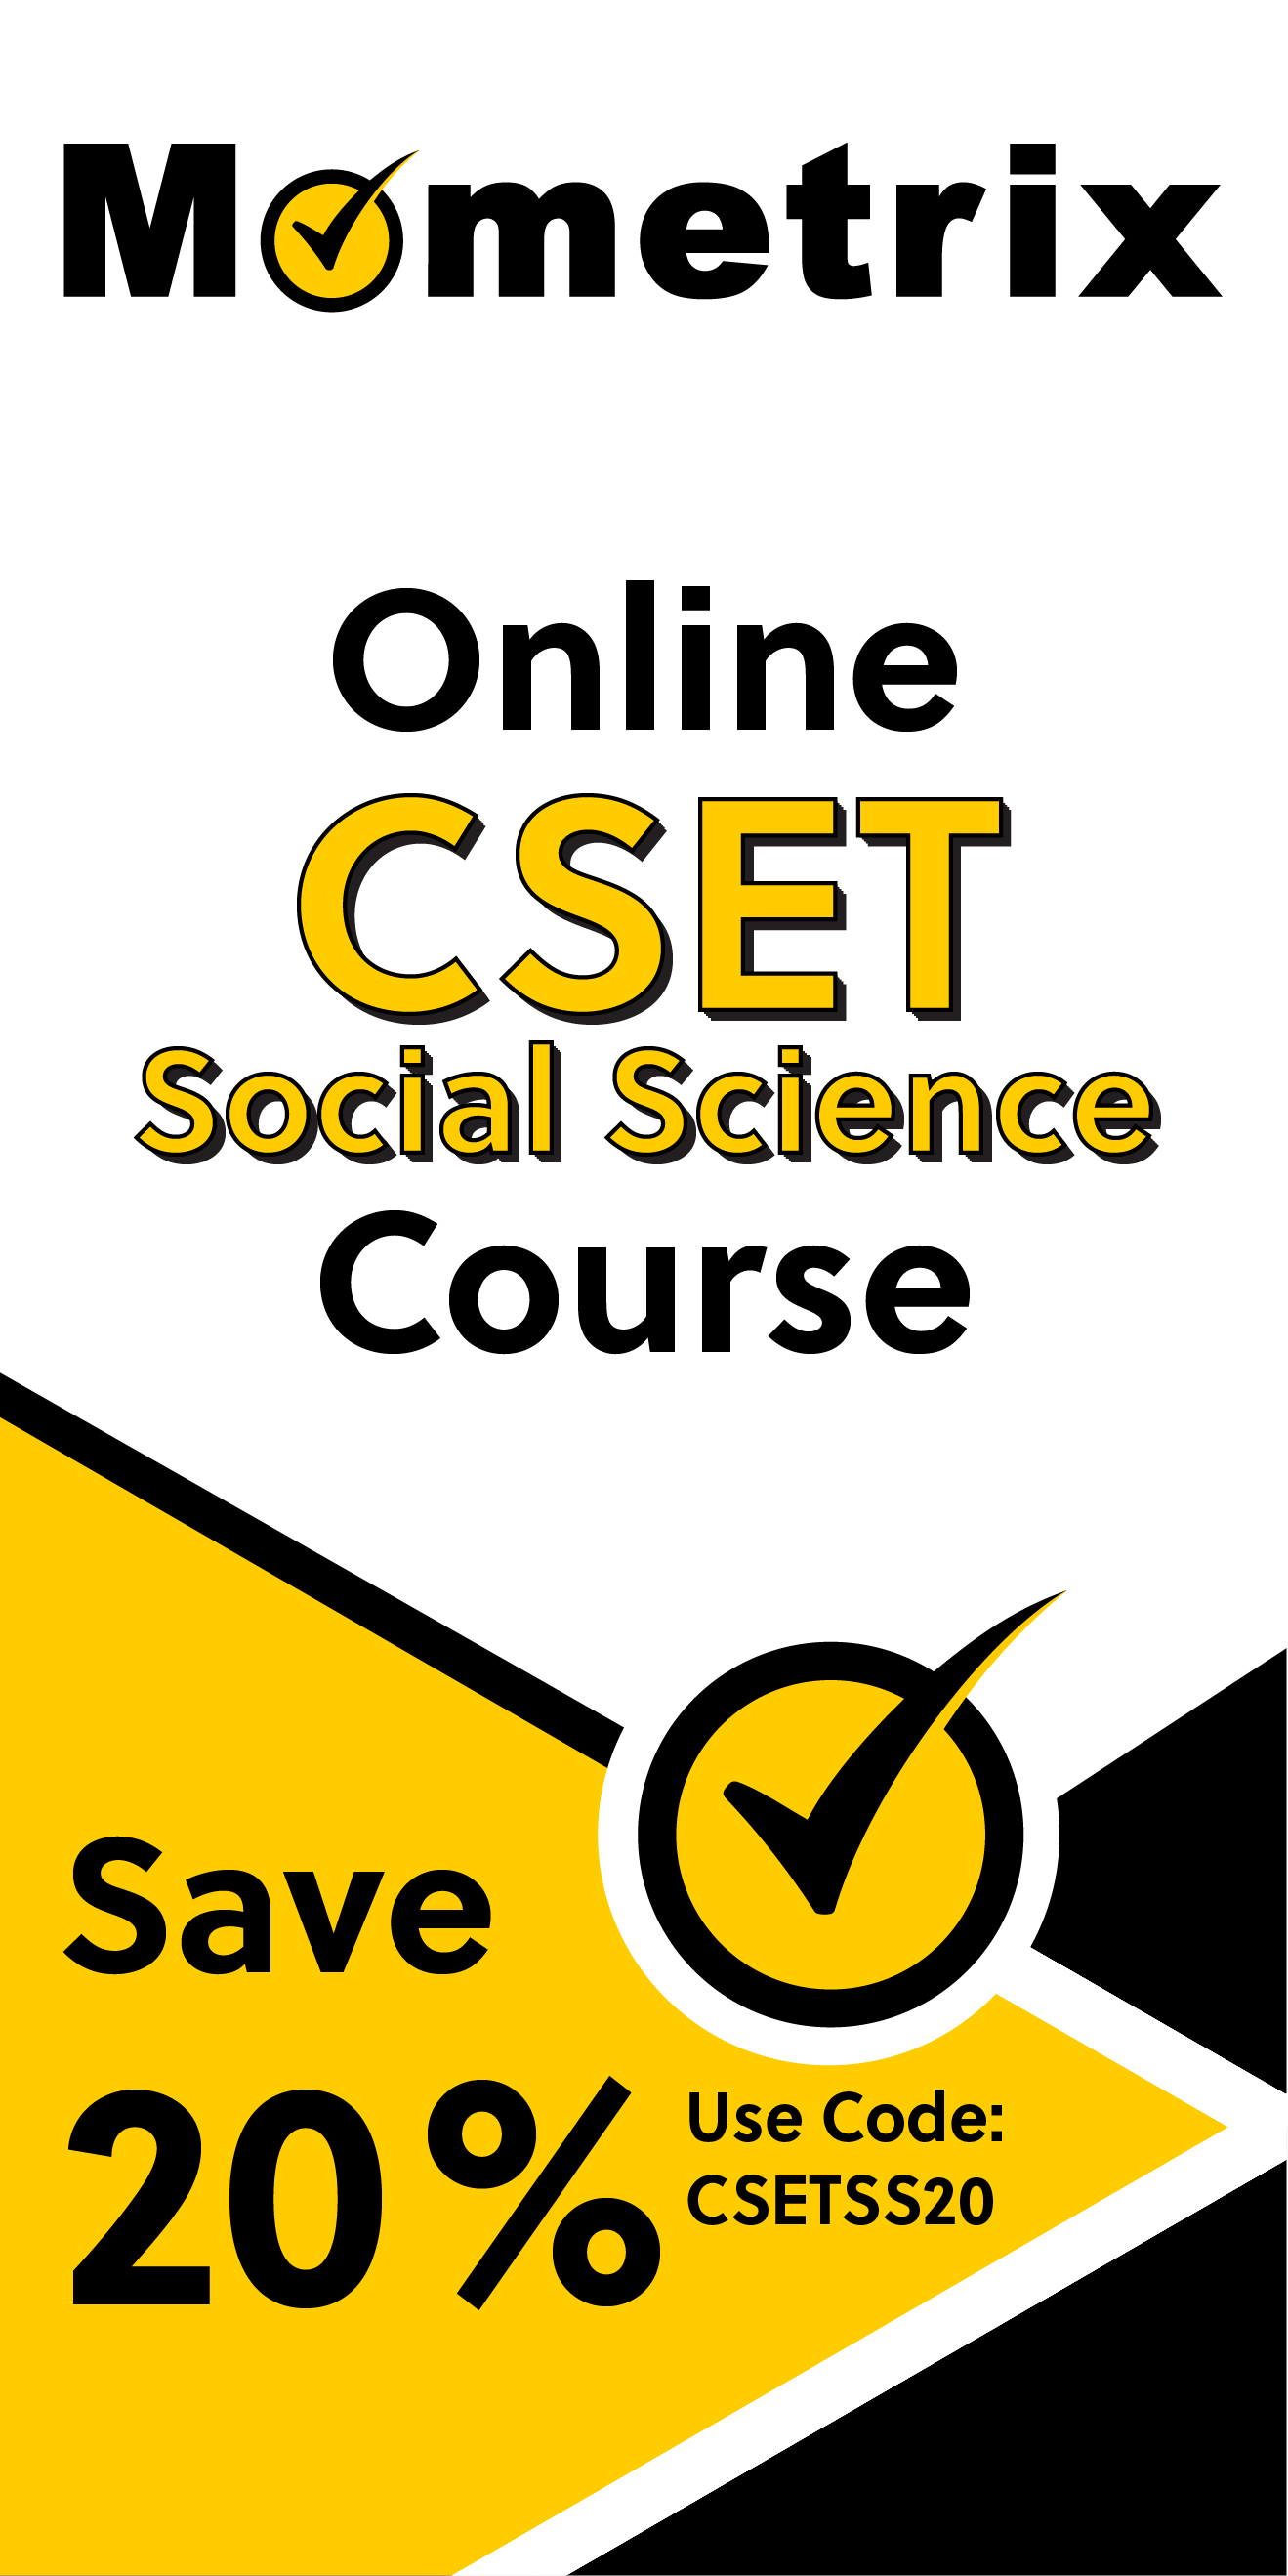 Click here for 20% off of Mometrix CSET Social Science online course. Use code: CSETSOCSCI20